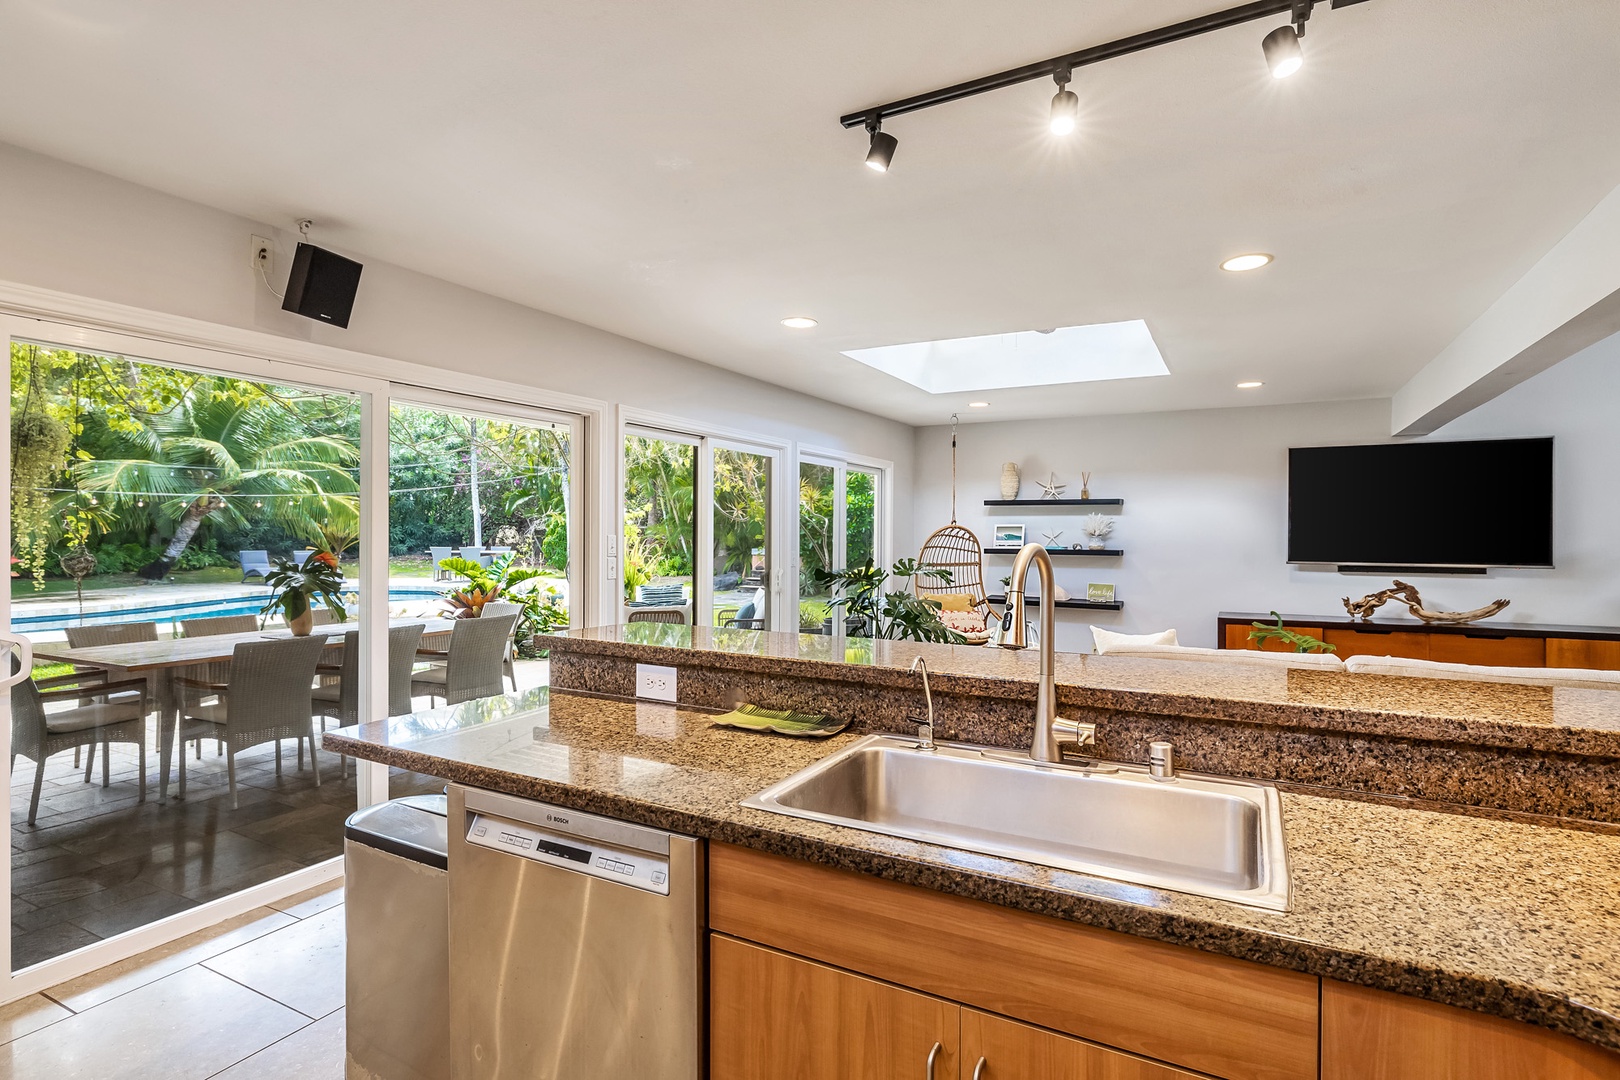 Honolulu Vacation Rentals, Hale Ho'omaha - The kitchen sink overlooks the living area and lanai